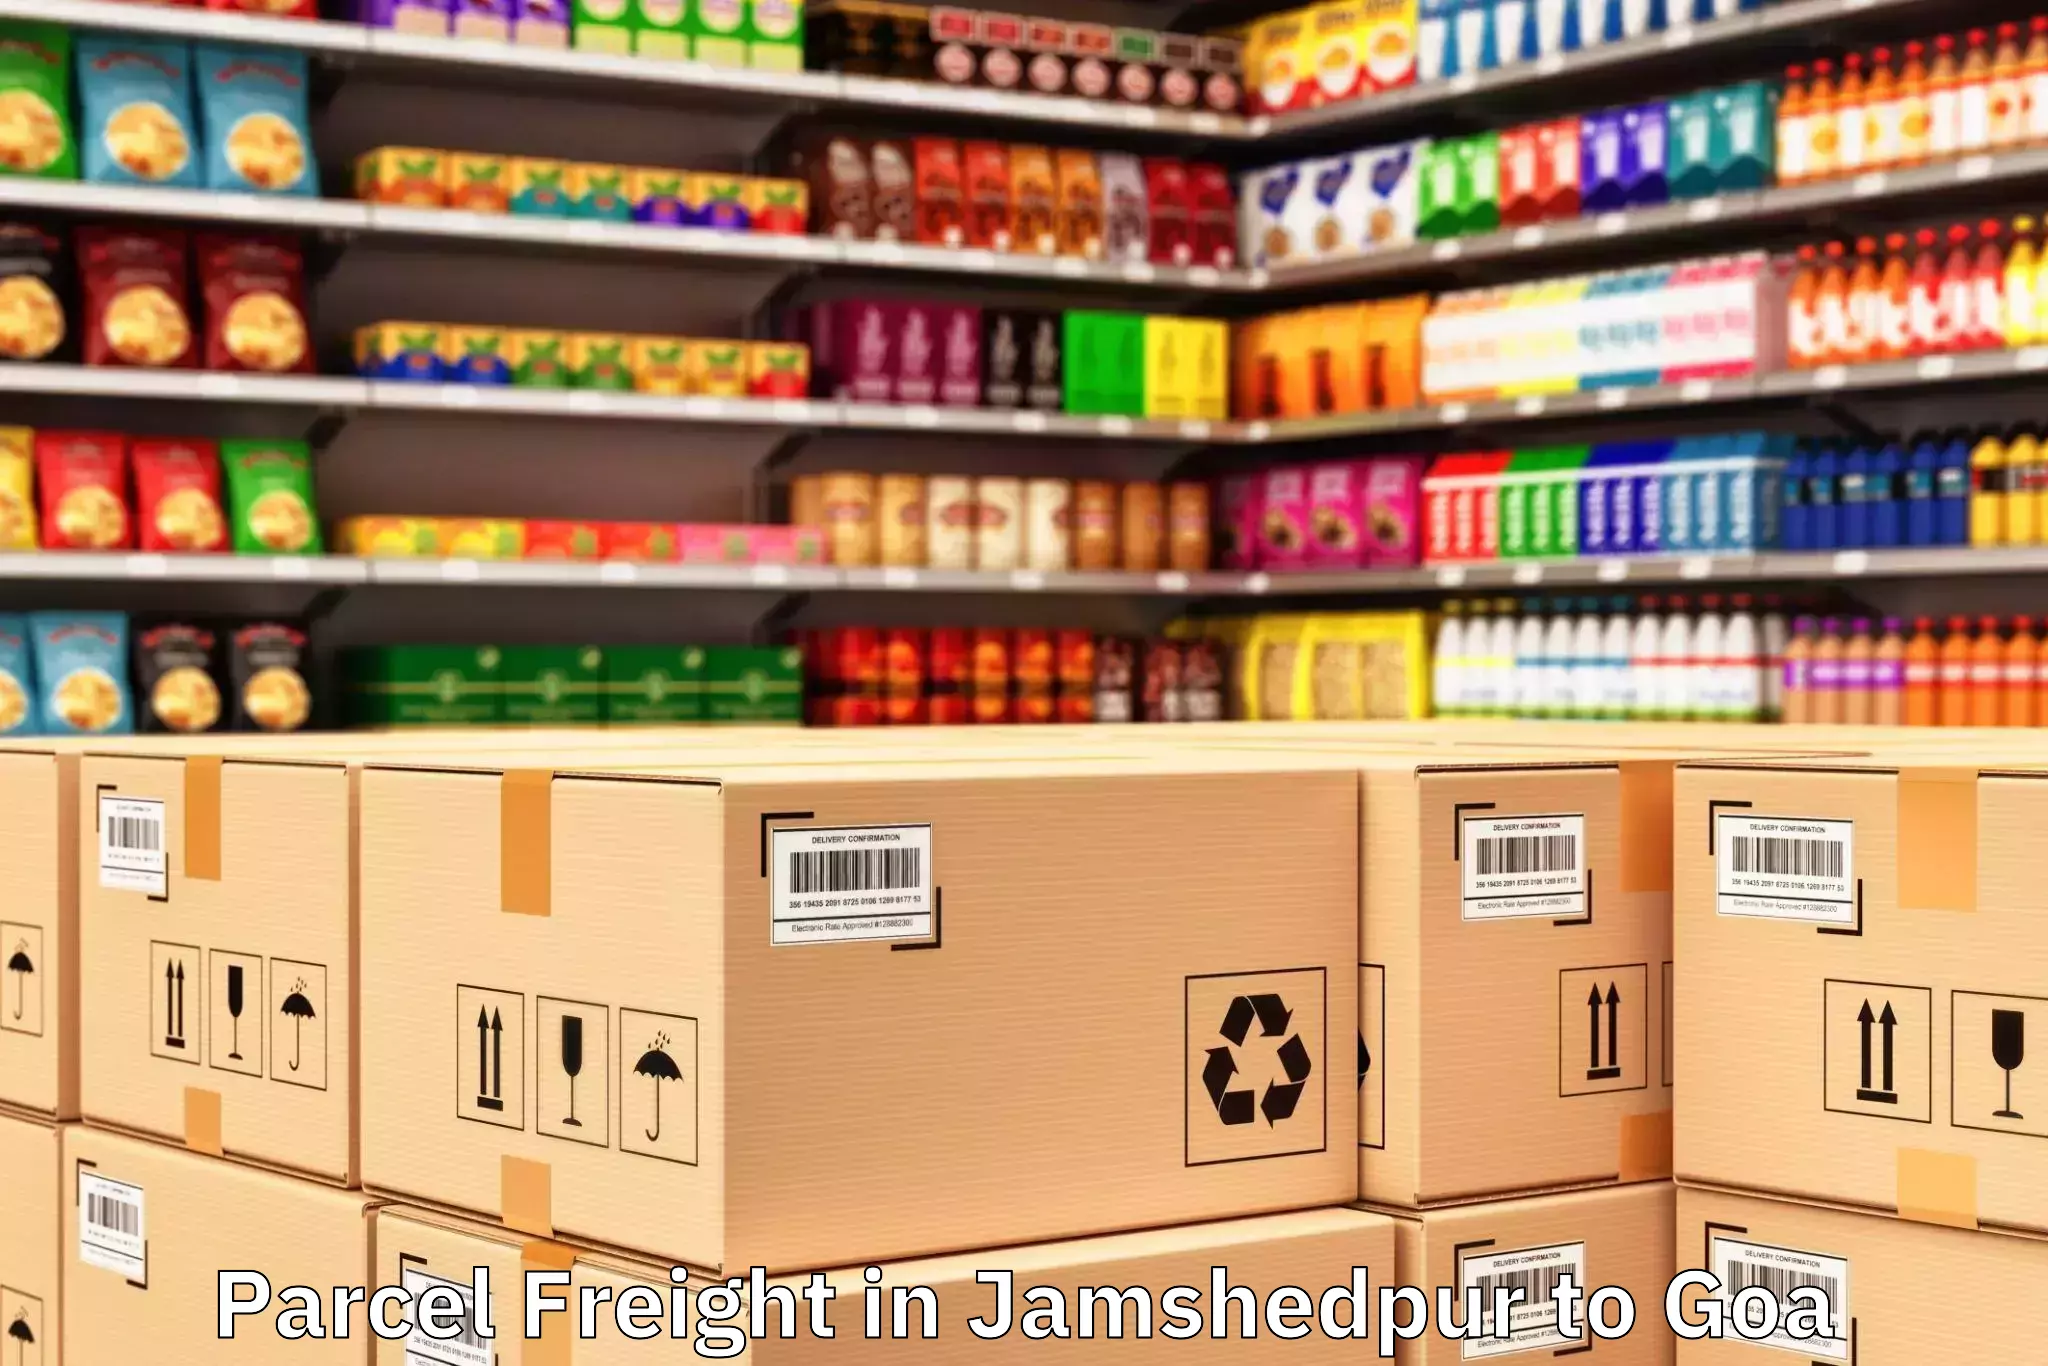 Easy Jamshedpur to Goa Parcel Freight Booking